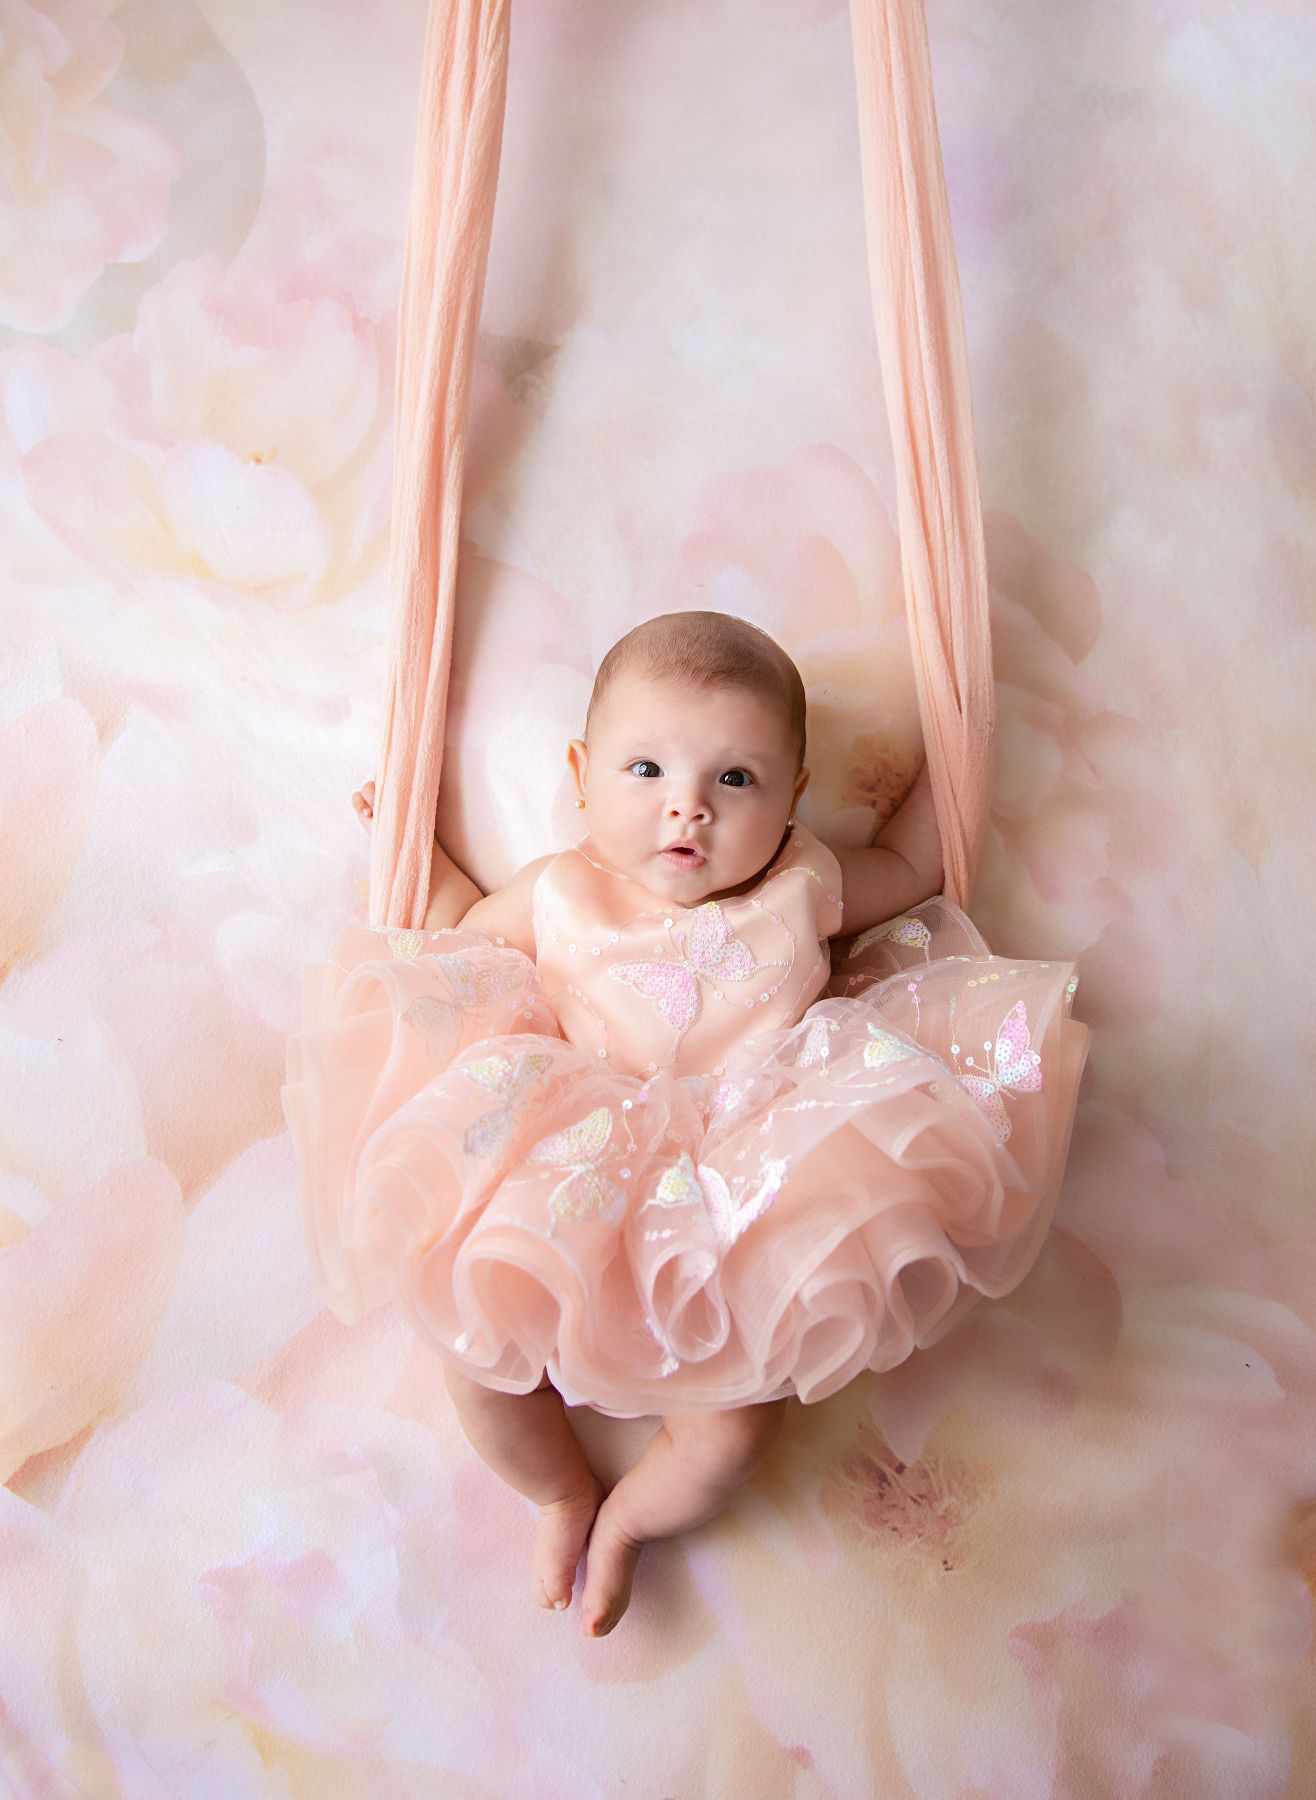 "Vera" Petal Length Dress (8 month - Petite 12 month) with bloomers